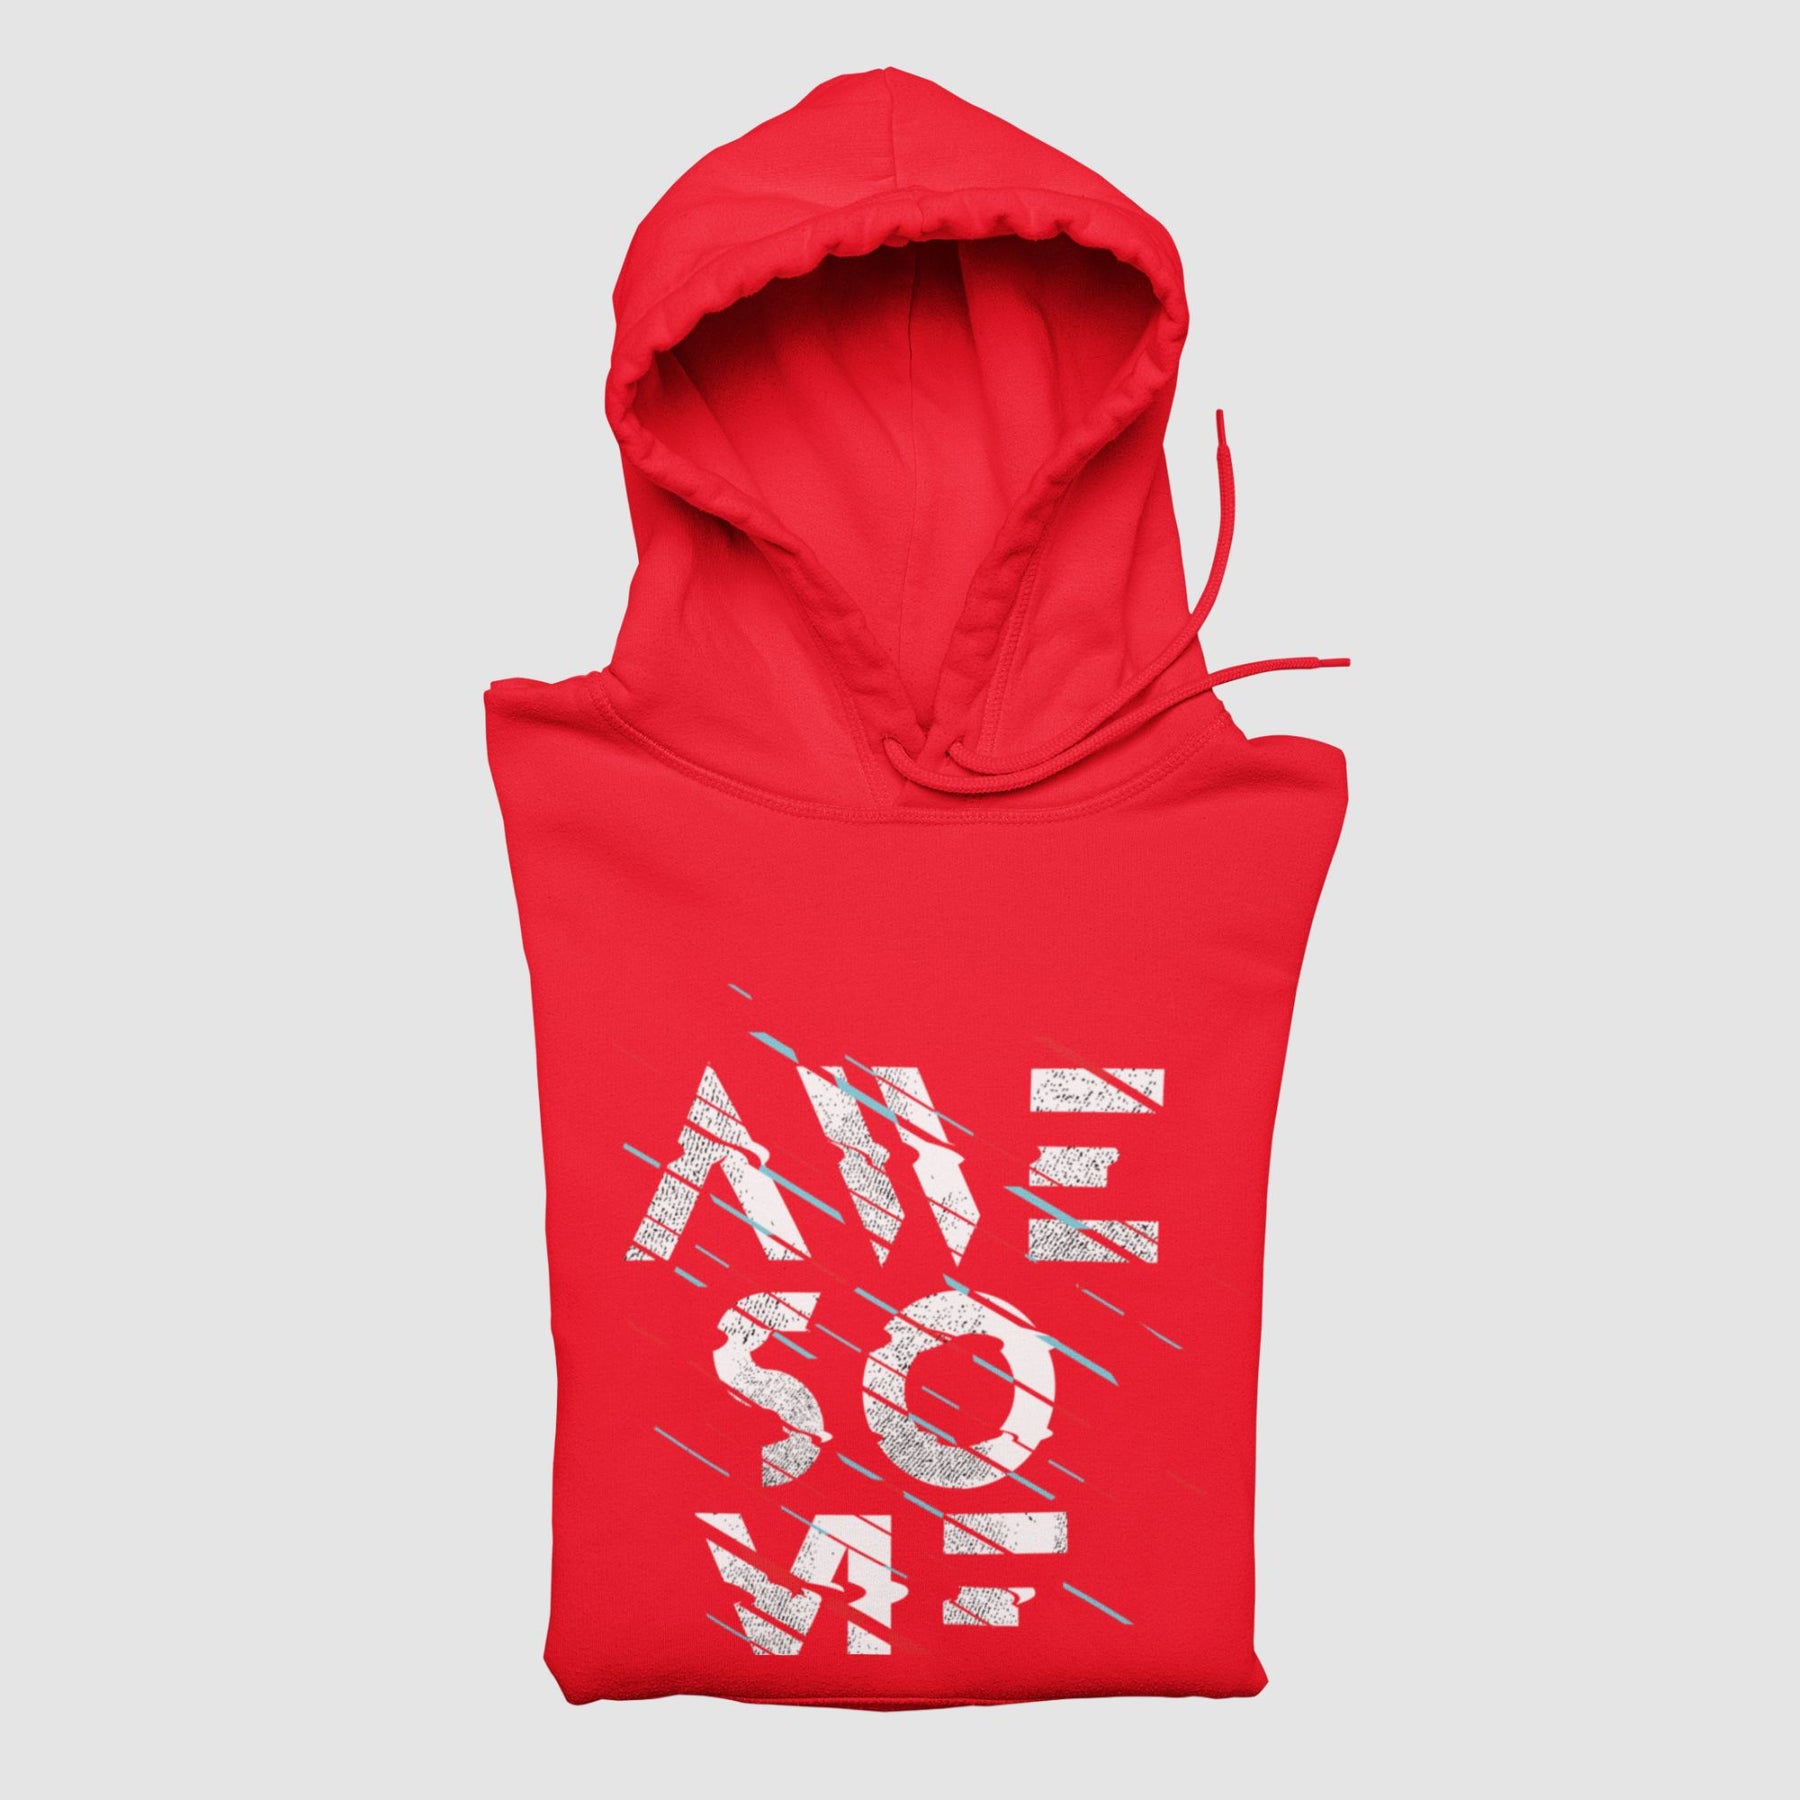 Awesome Unisex Hoodie